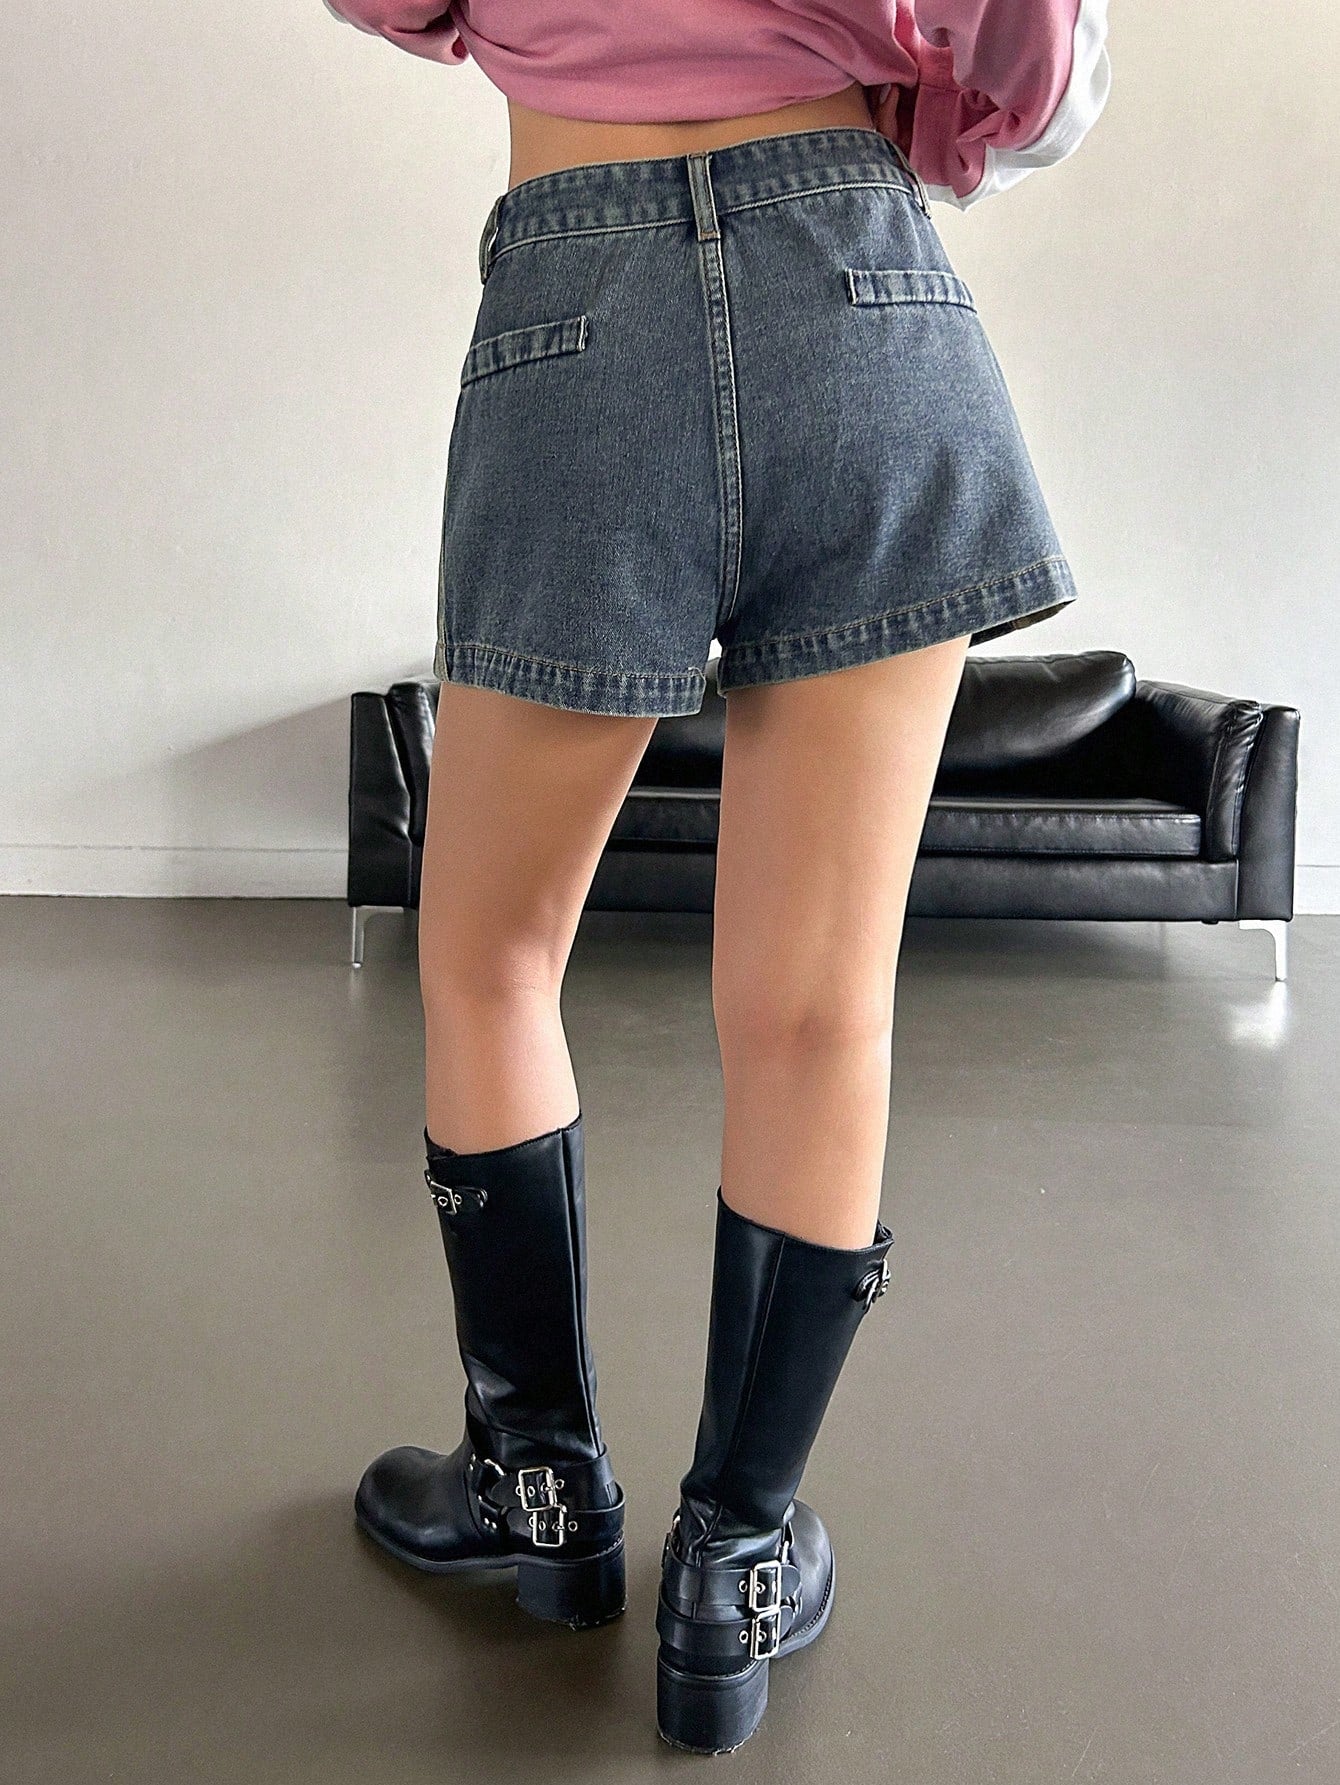 Ladies" Casual Blue Denim Shorts With Pleats And Slanted Pockets For Summer